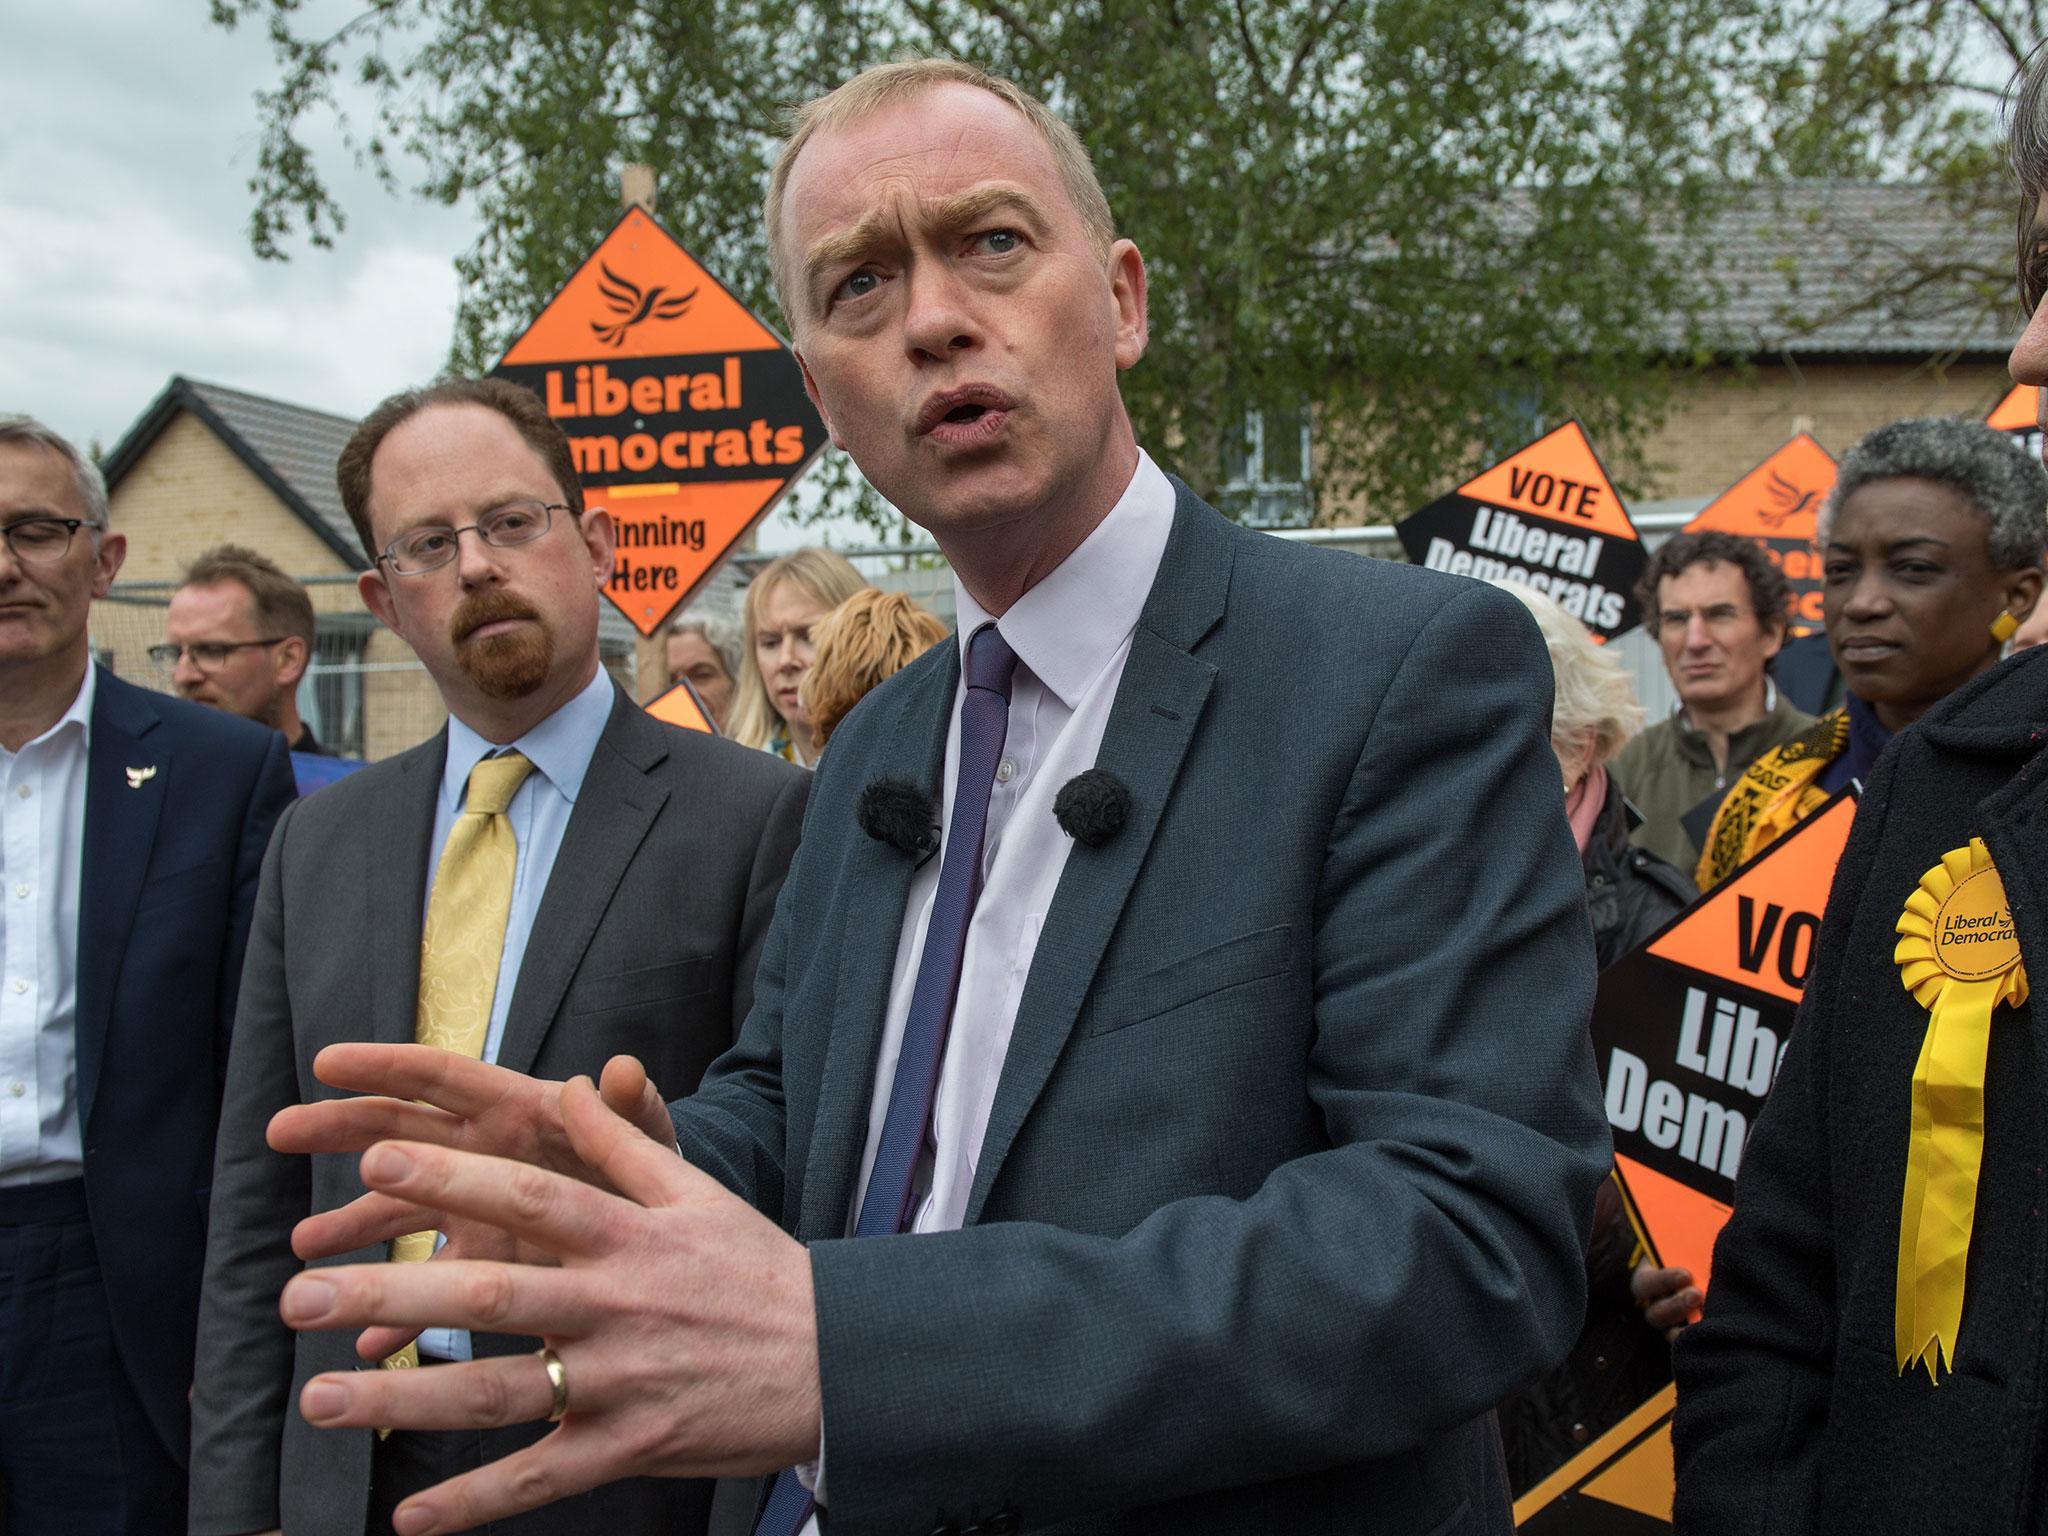 The Lib Dem leader said he was 'disgusted' by the PM's stance